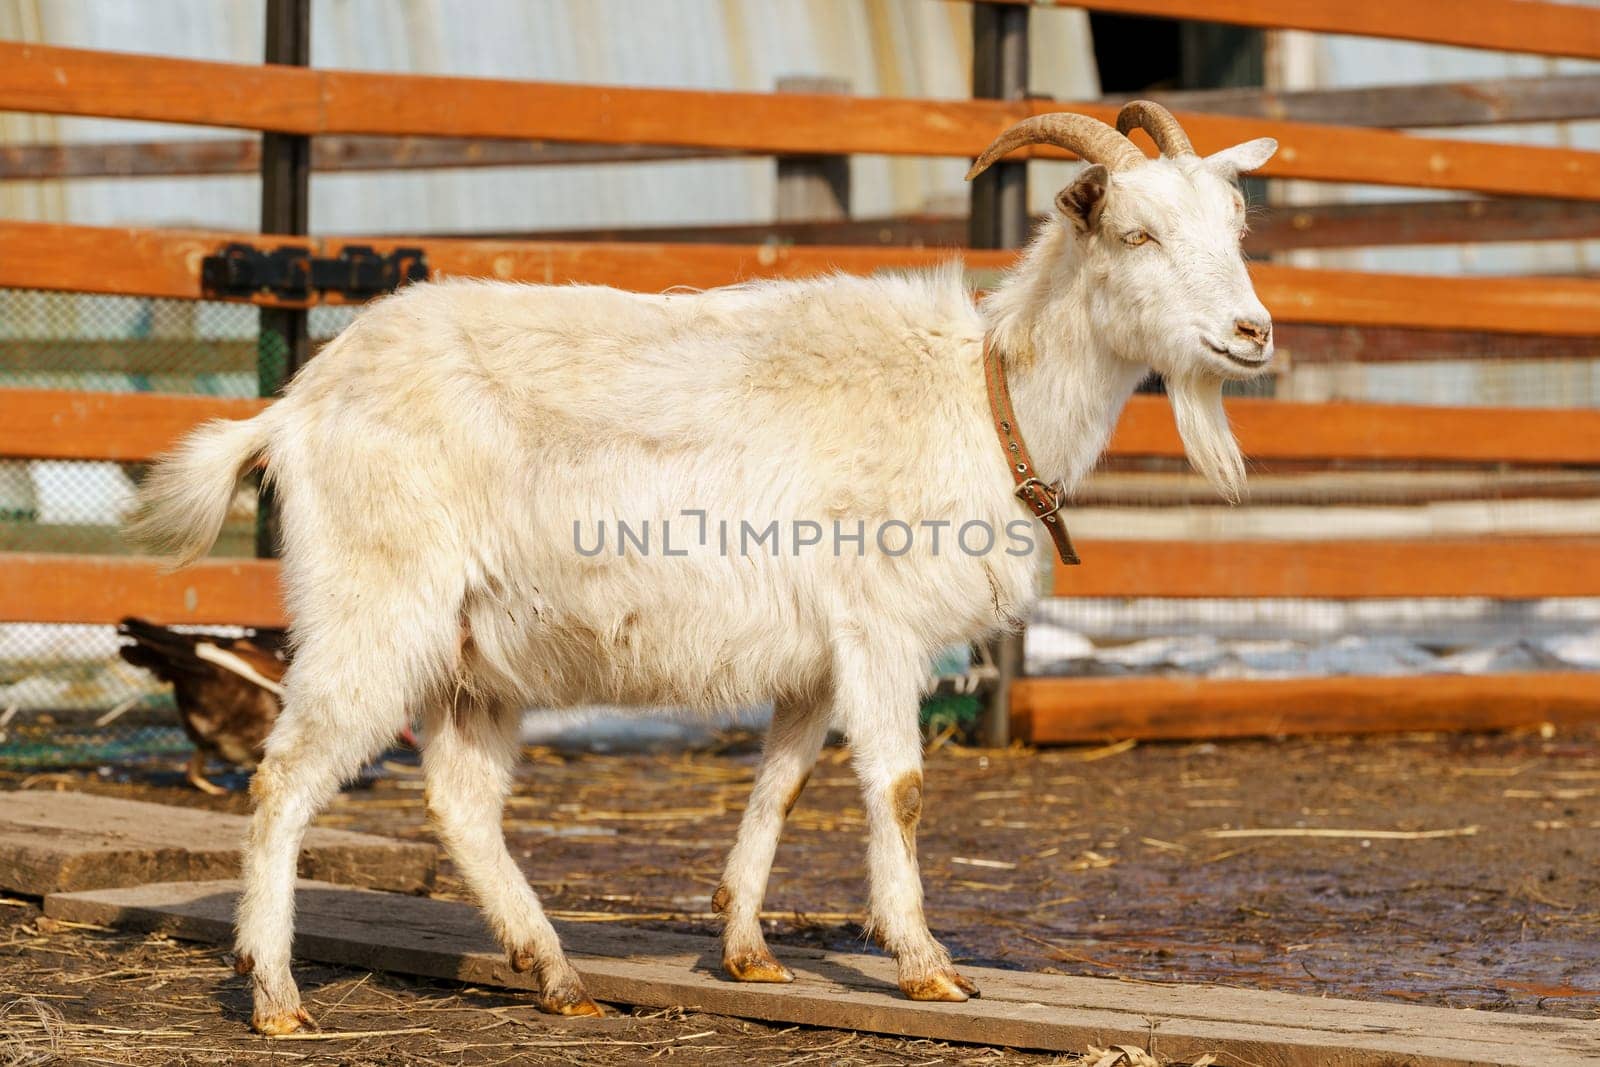 Goat on farm look peaceful and content in their enclosed environment. Selective focus.